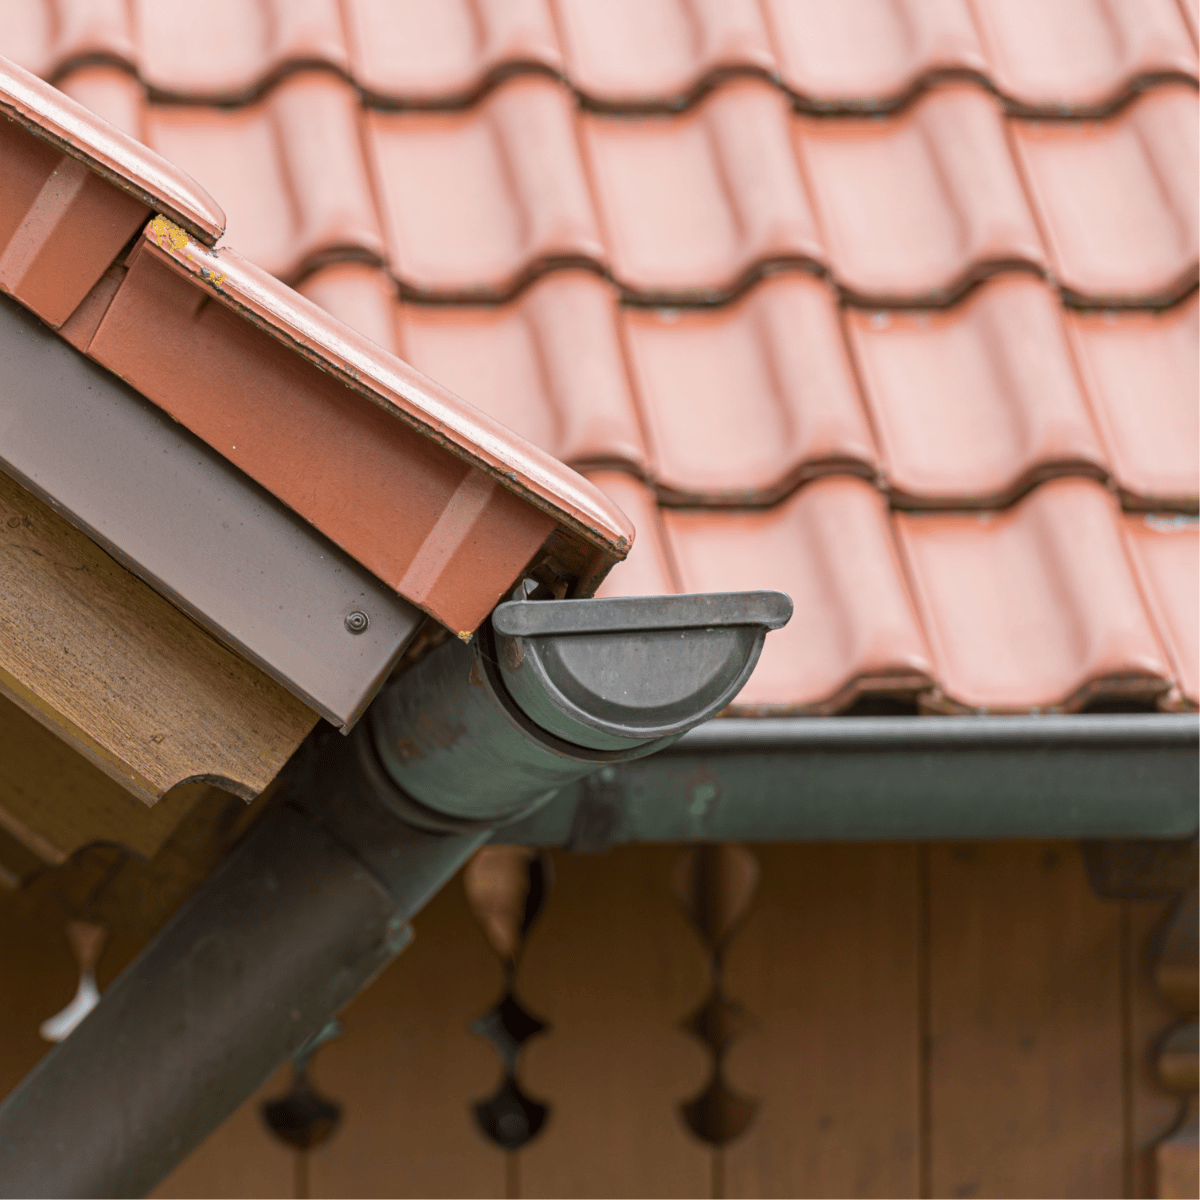 Antonio TX gutter cleaning near me
Hollywood Park